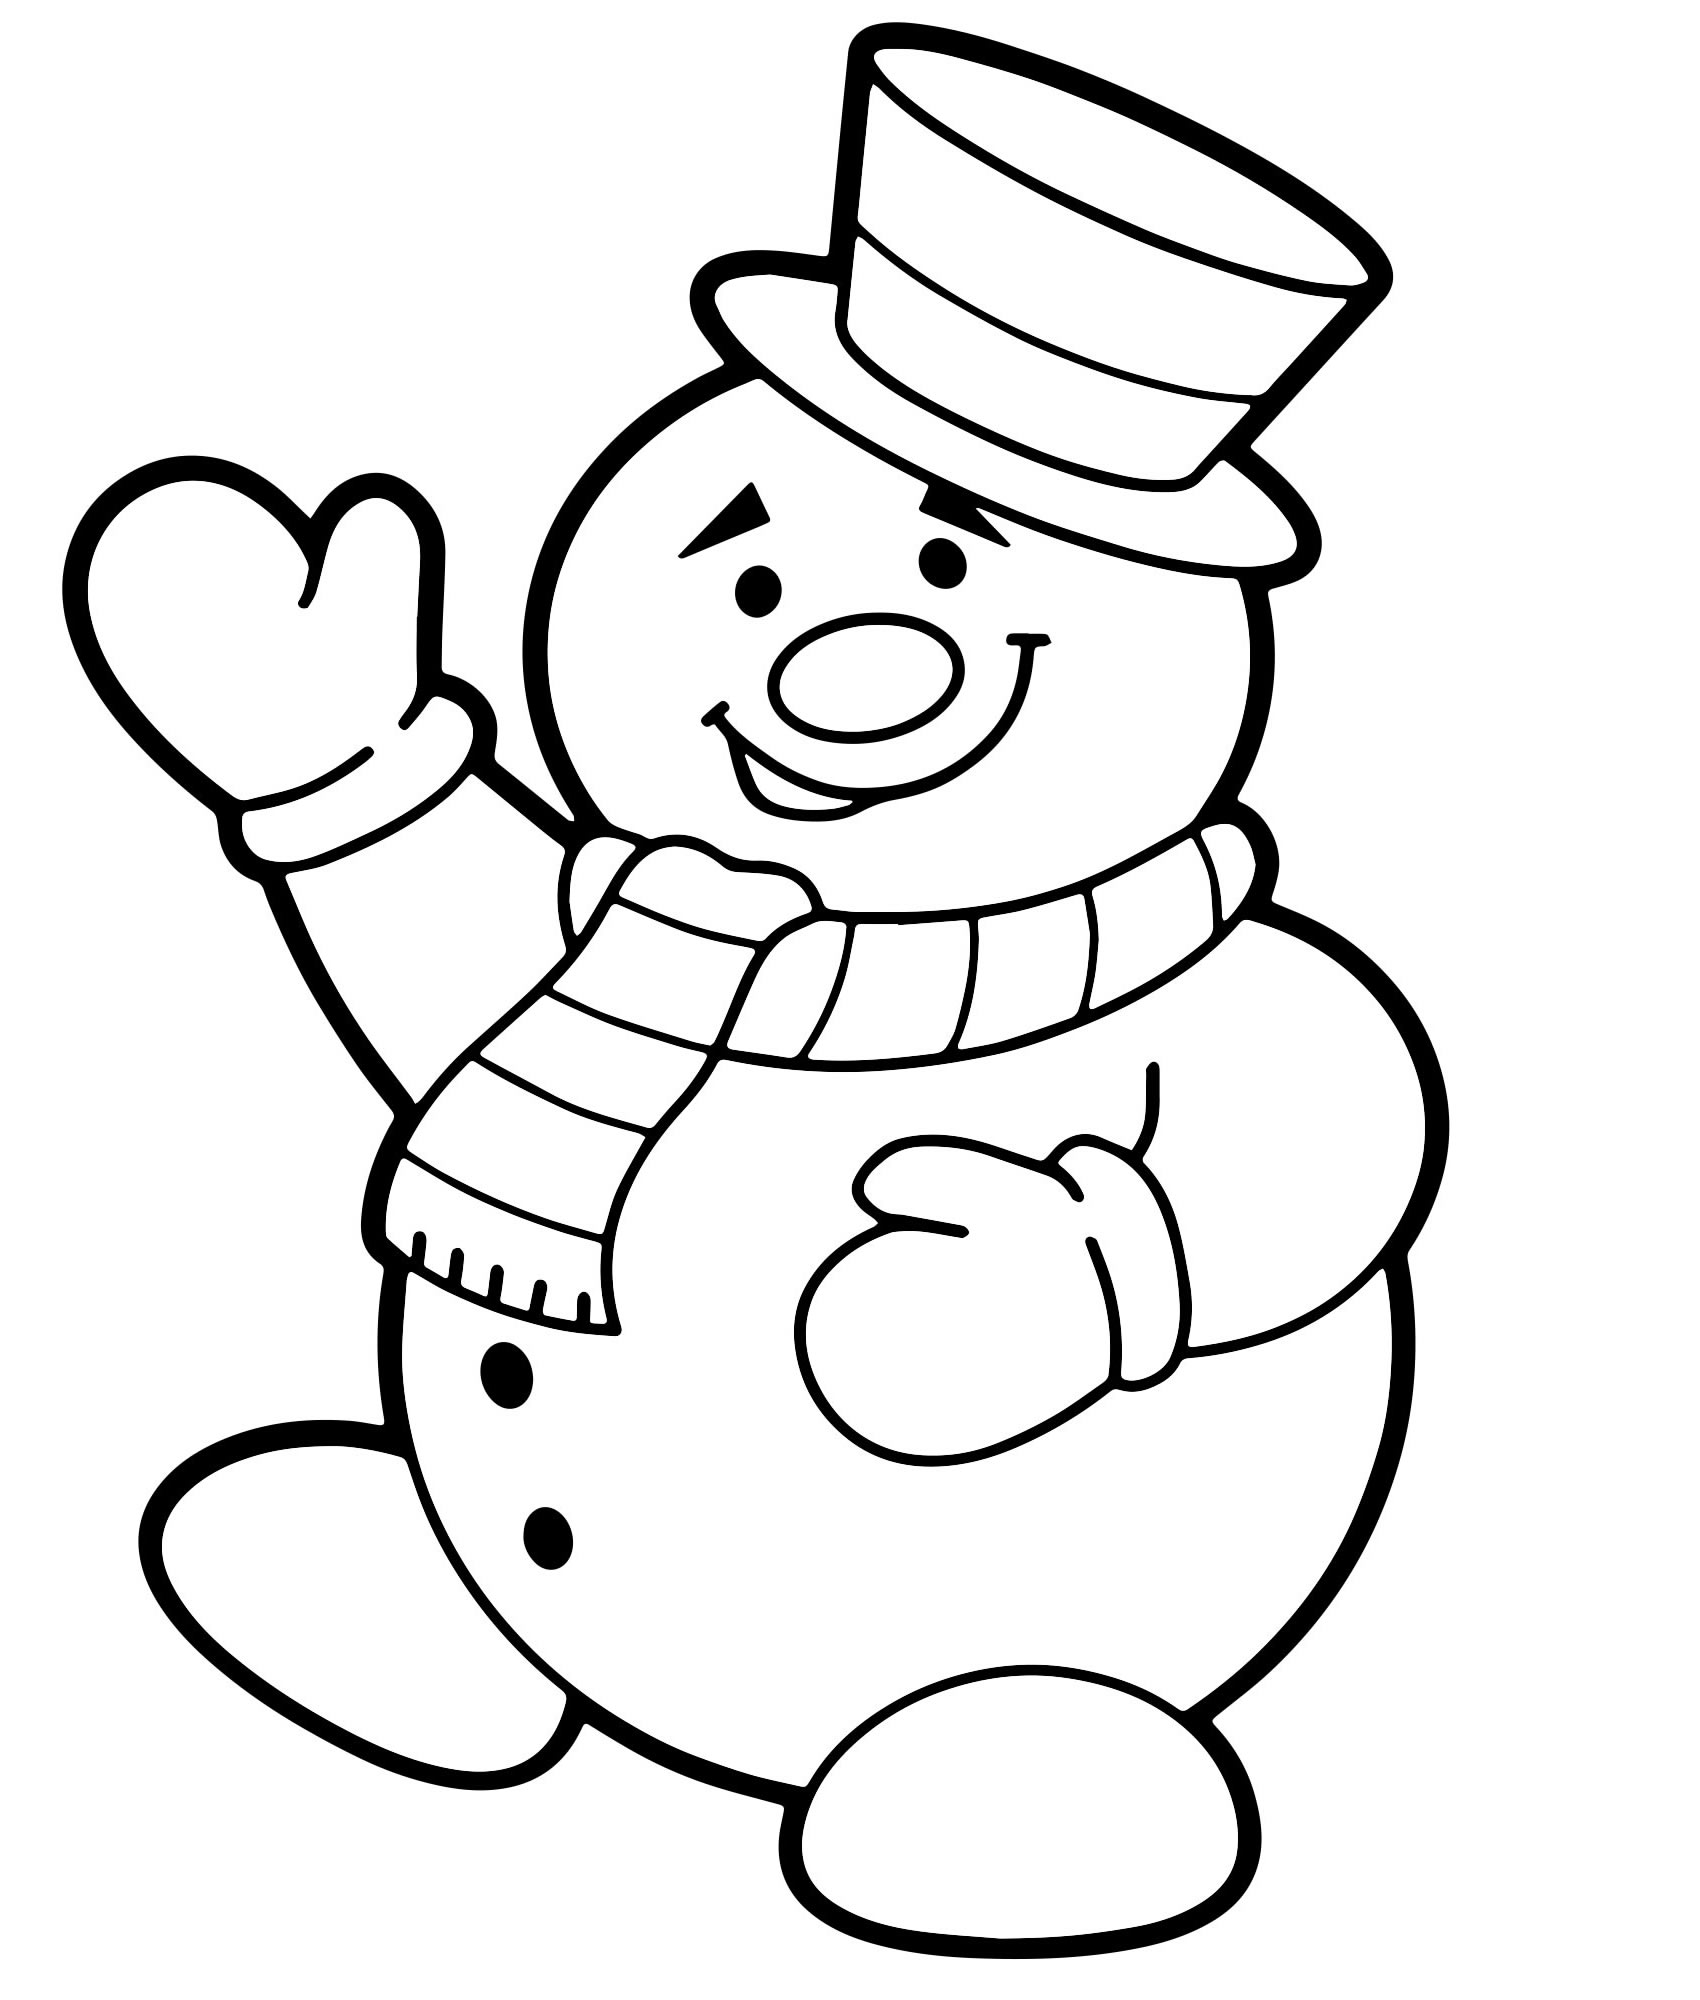 Snowman with examples #5